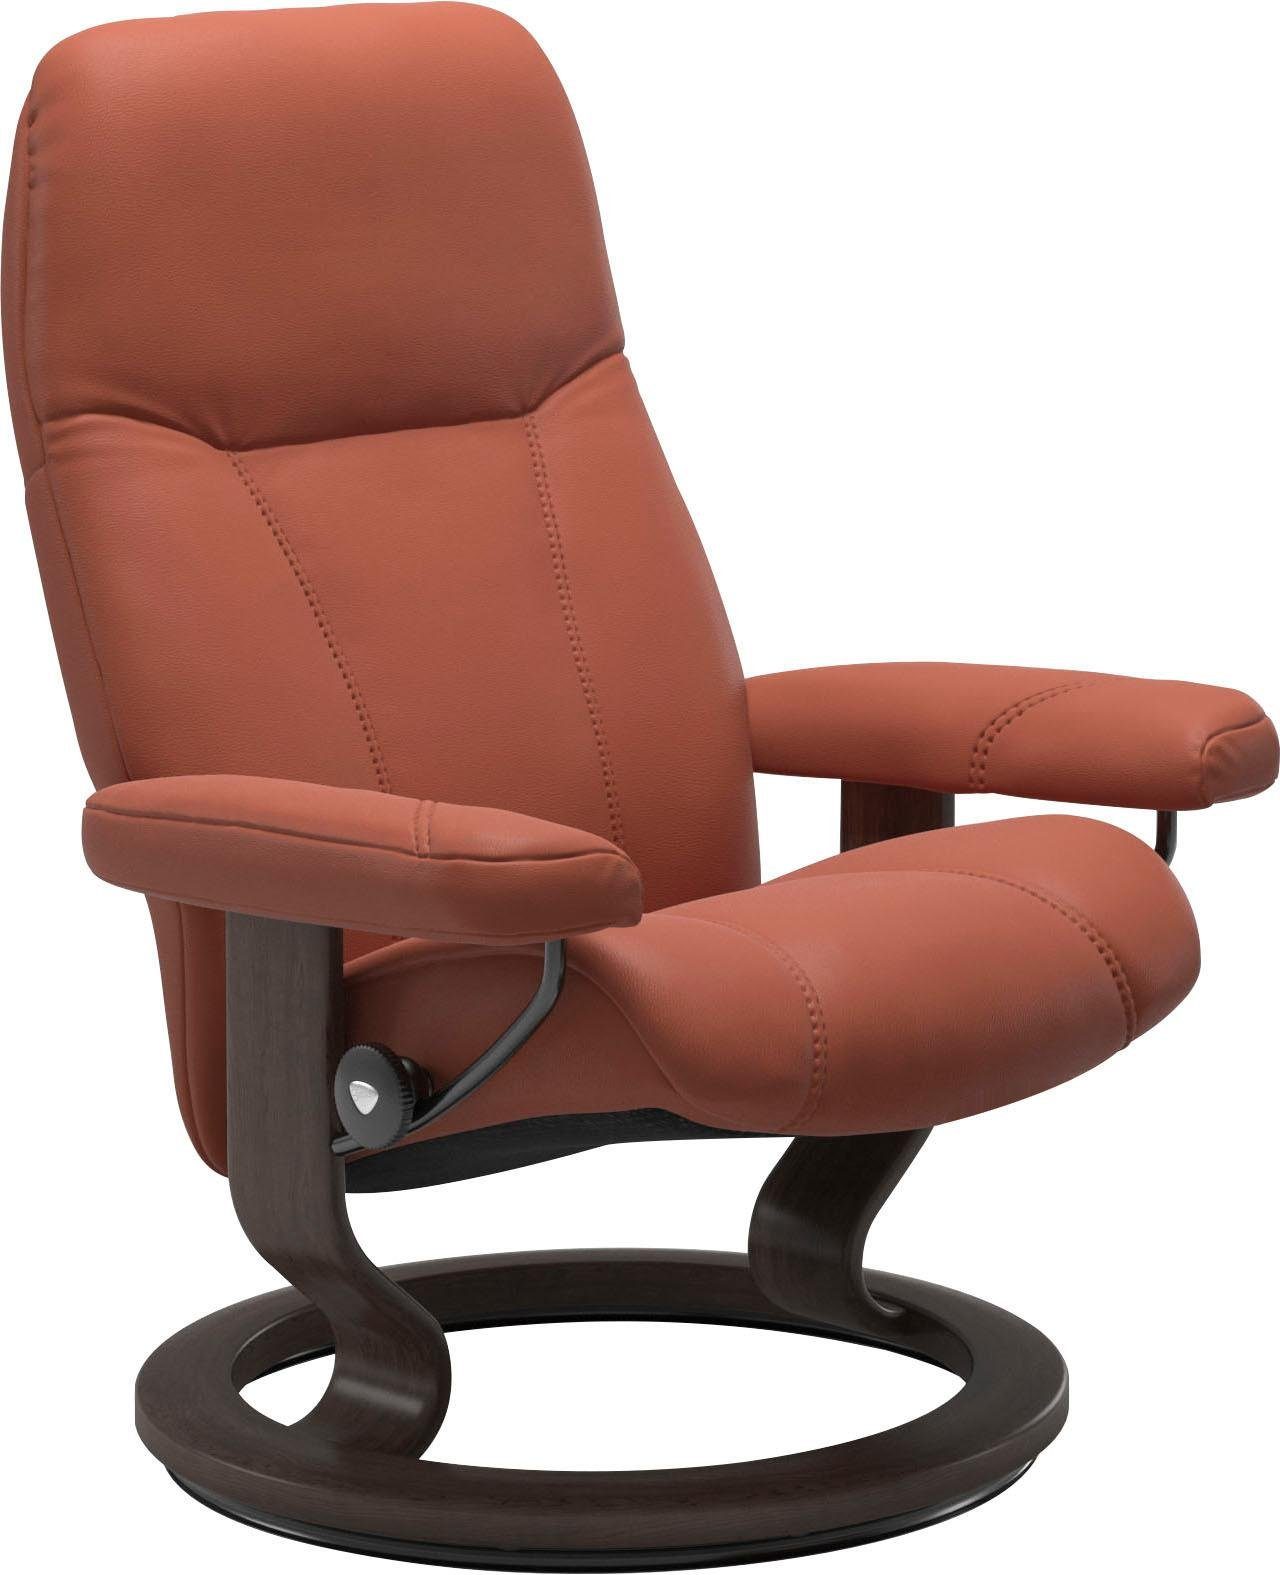 Stressless® Relaxsessel M, Consul, Gestell Größe Wenge mit Base, Classic